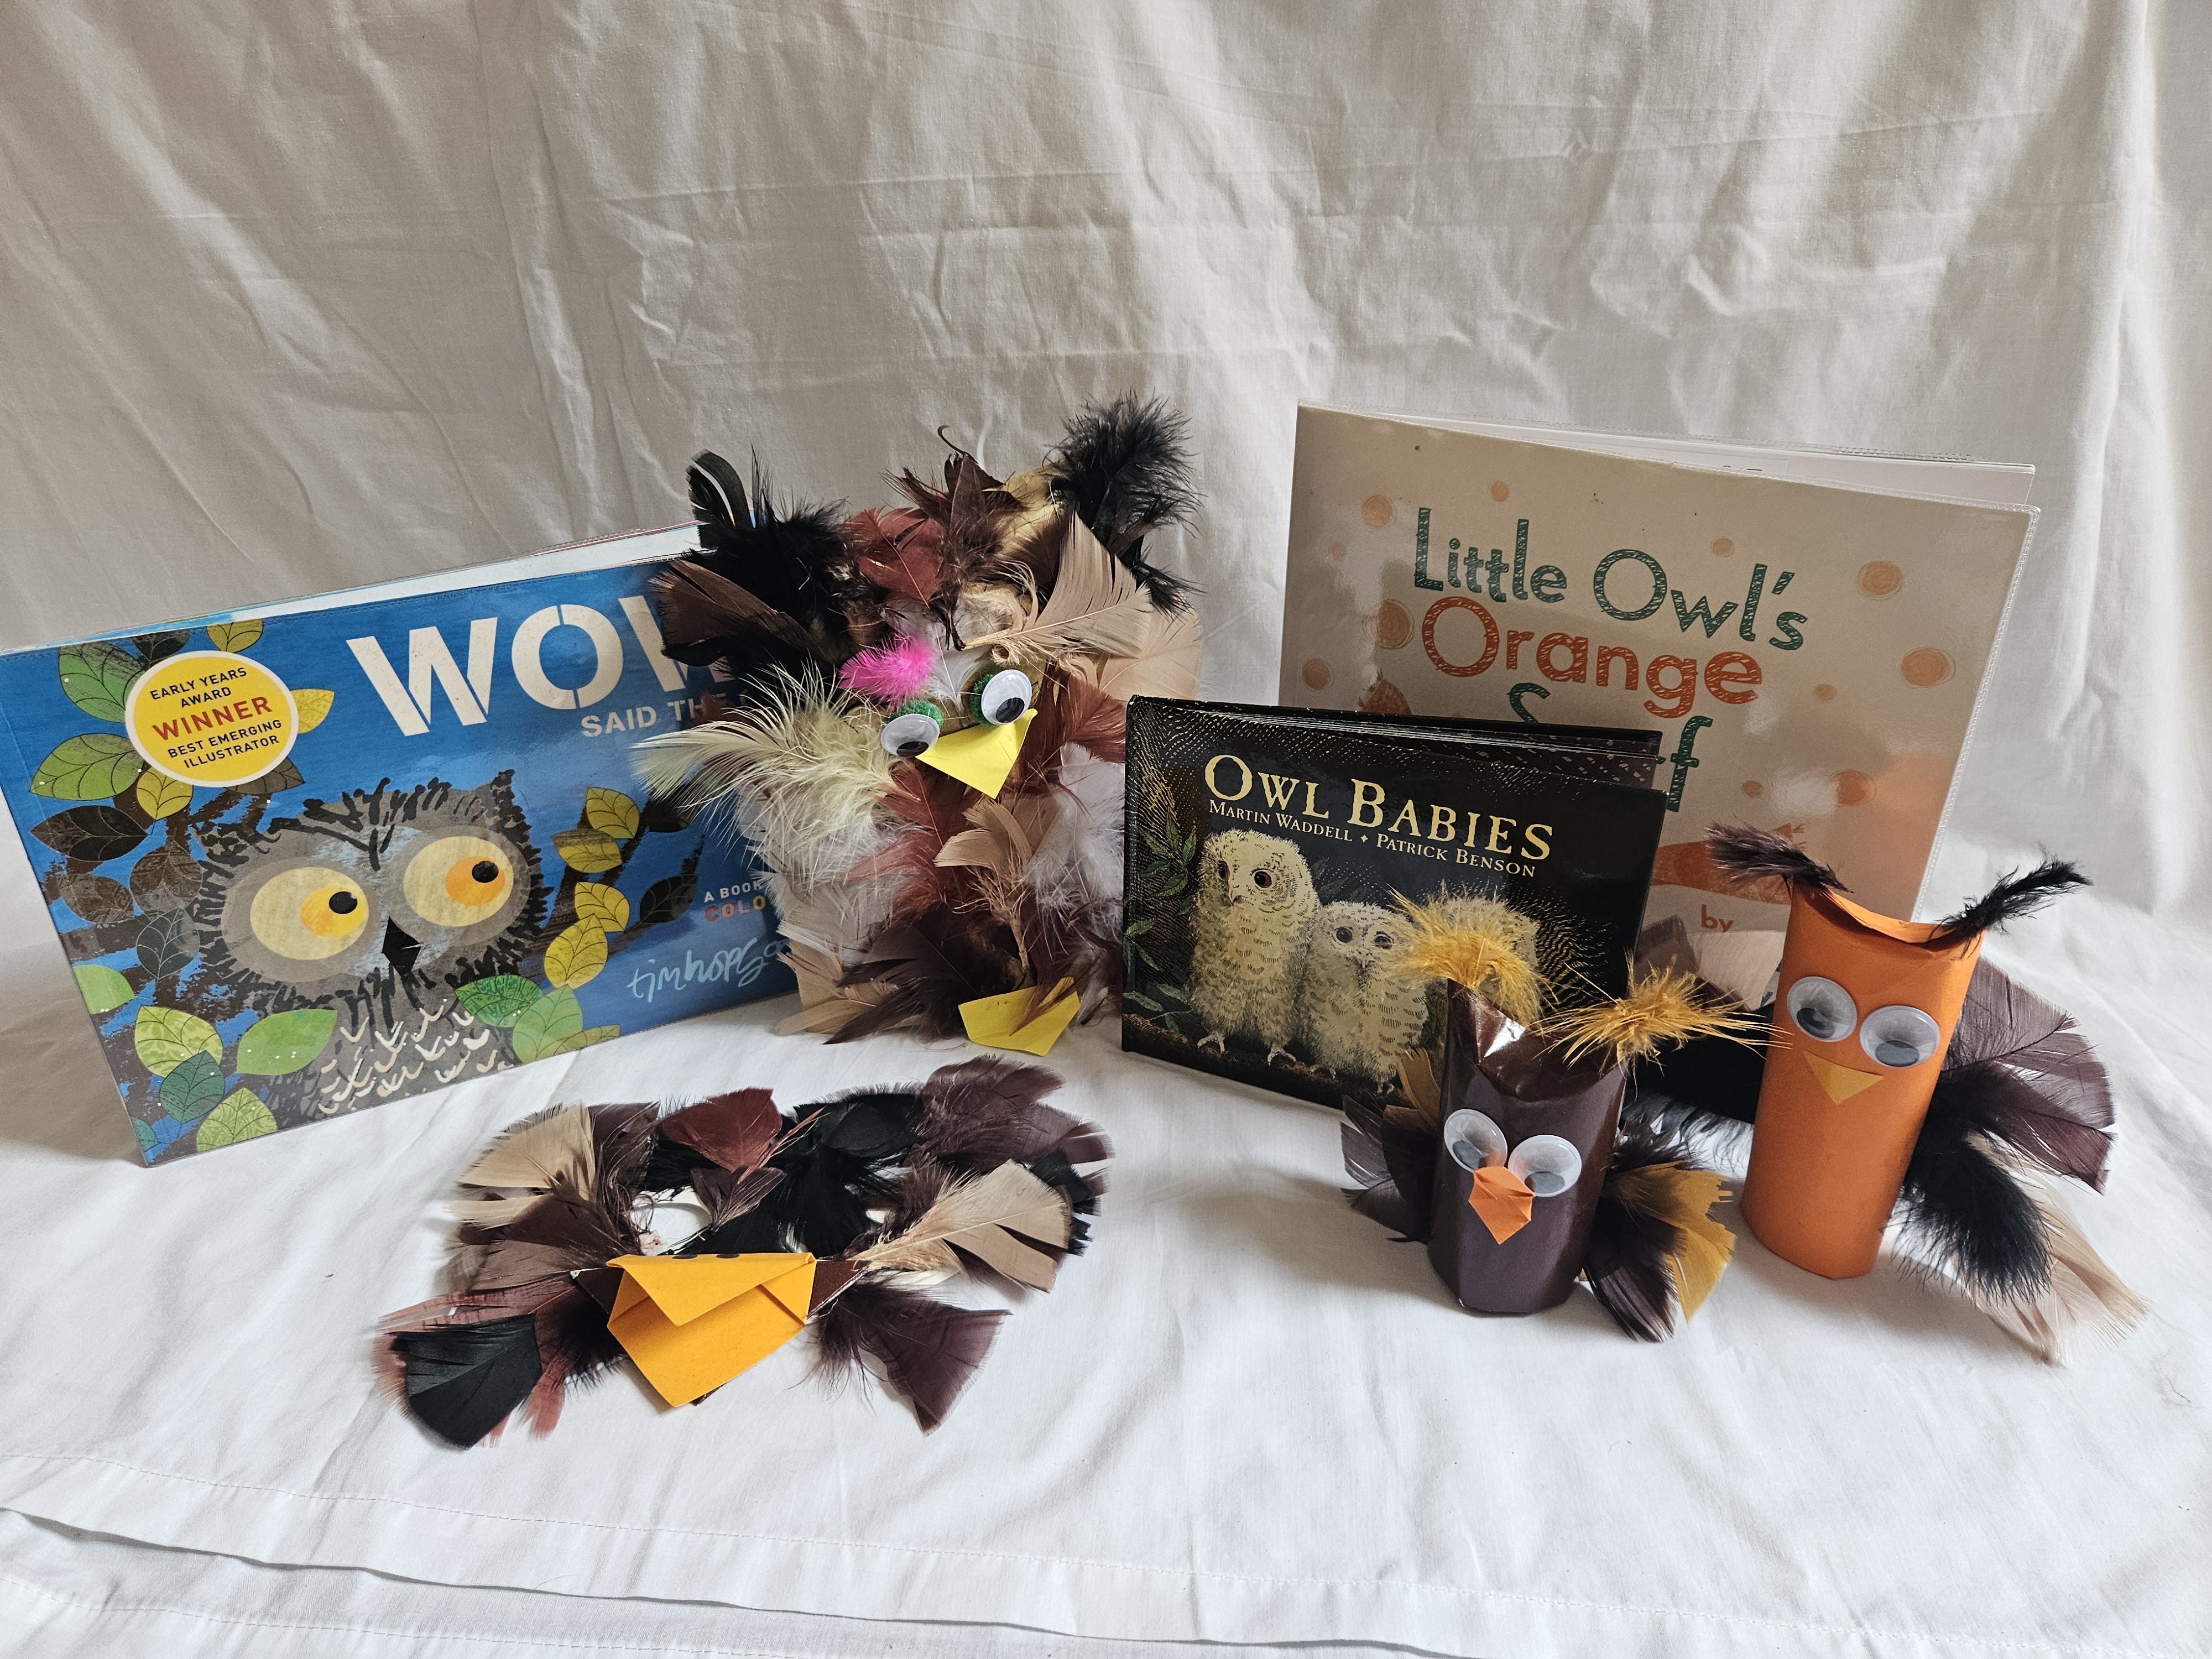 A selection of owl books and toys